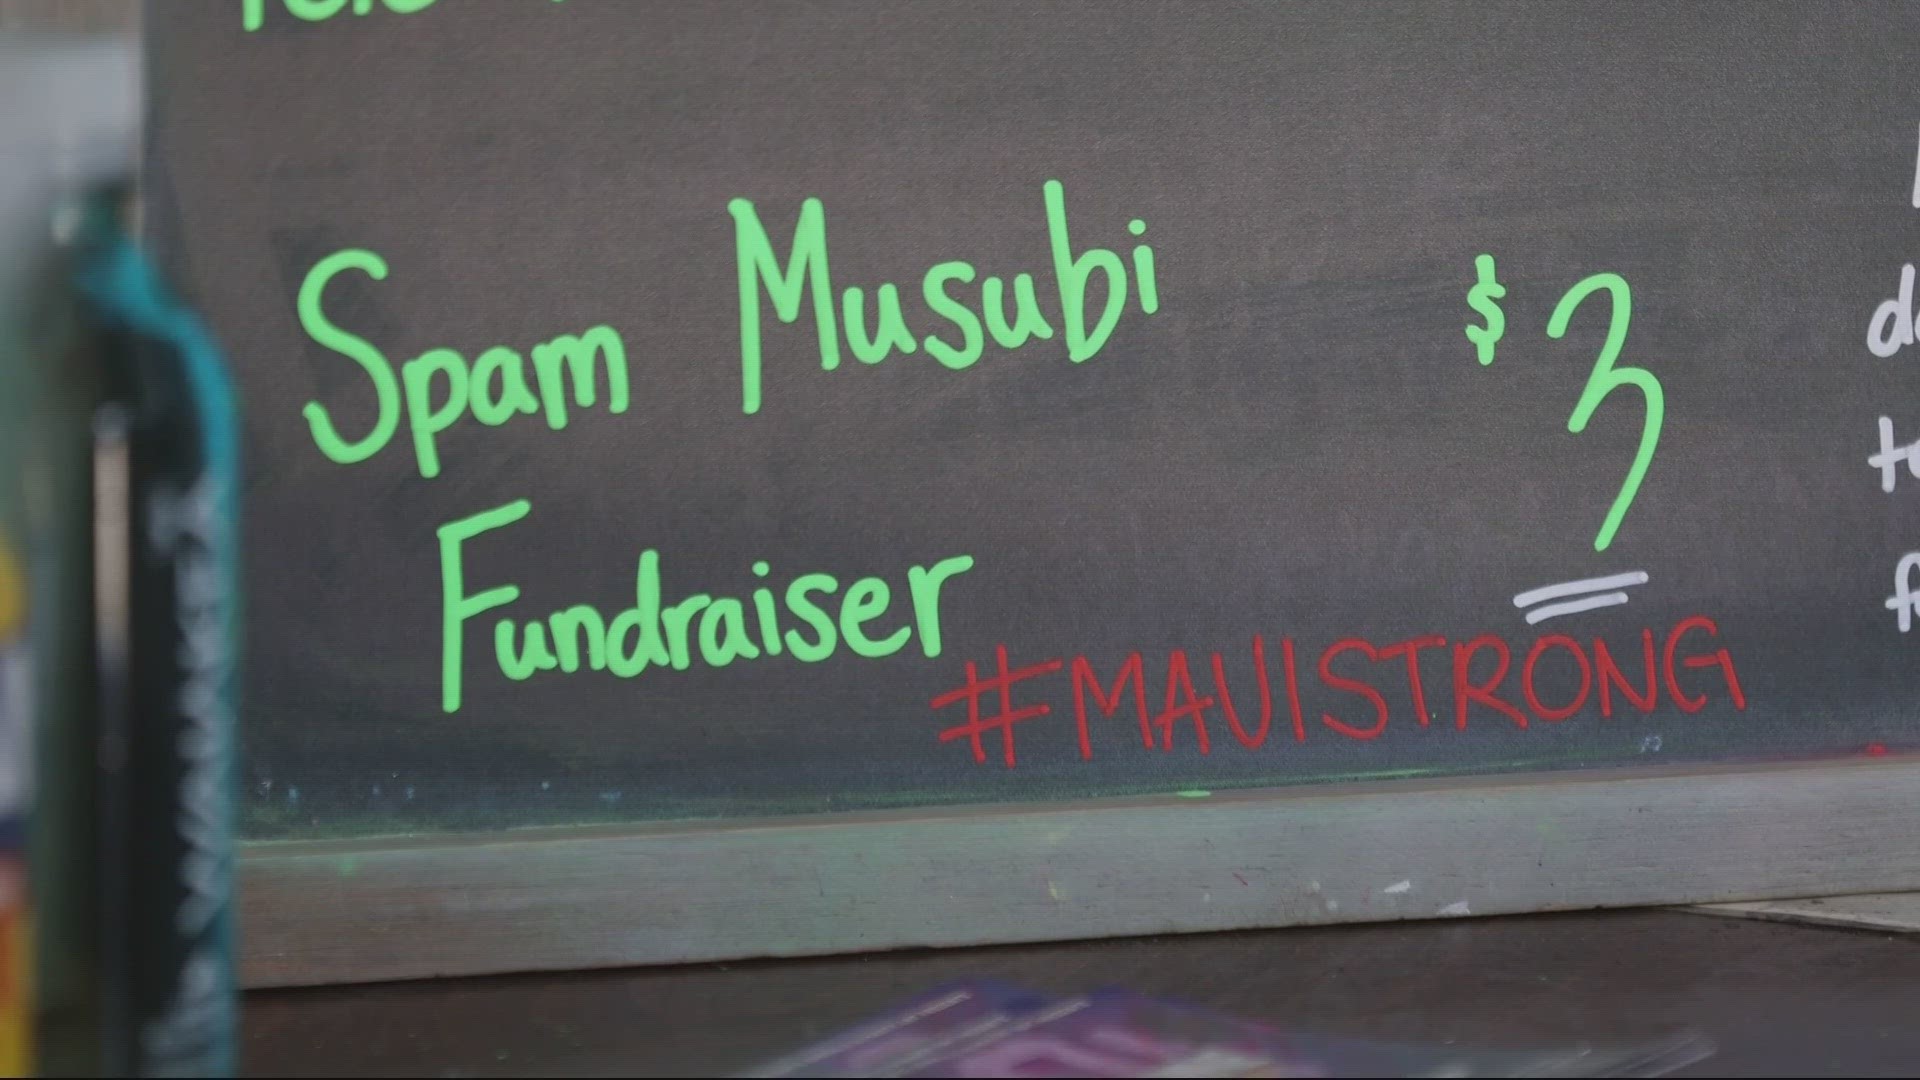 Grind with Tryz on Northeast Alberta is selling spam musubis for $3. It’s part of a fundraiser for the people of Maui displaced by wildfires.